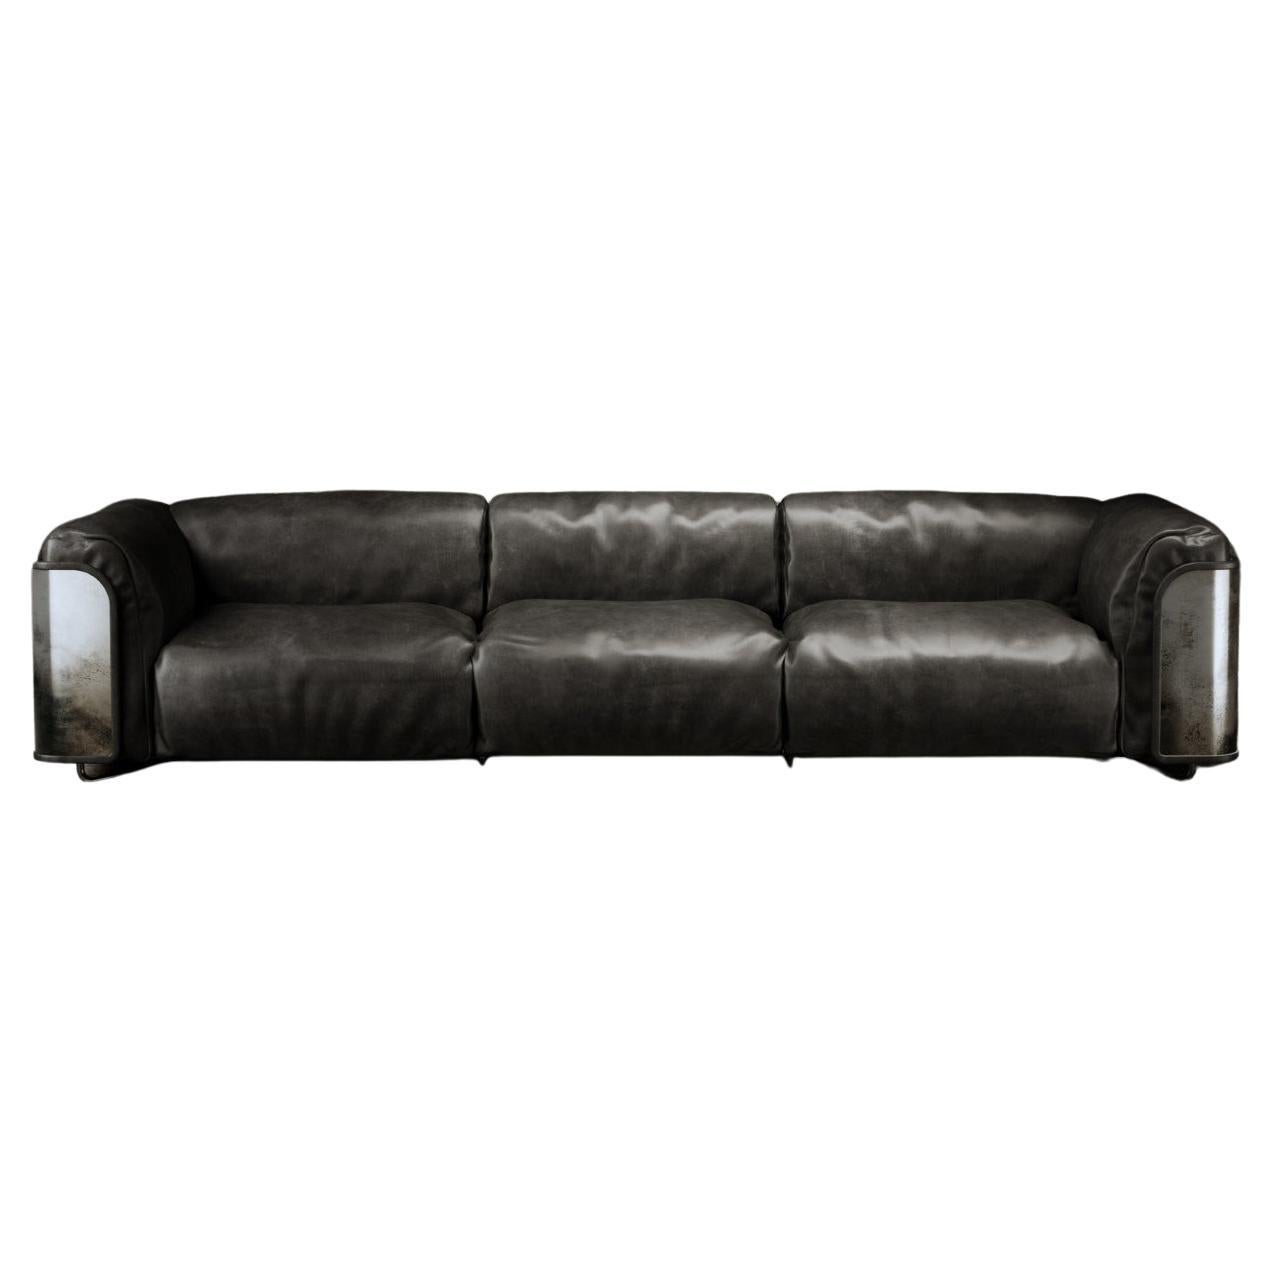 Saint-Germain 3-Seat Sofa in Black Timeless Leather and Raw Silver For Sale